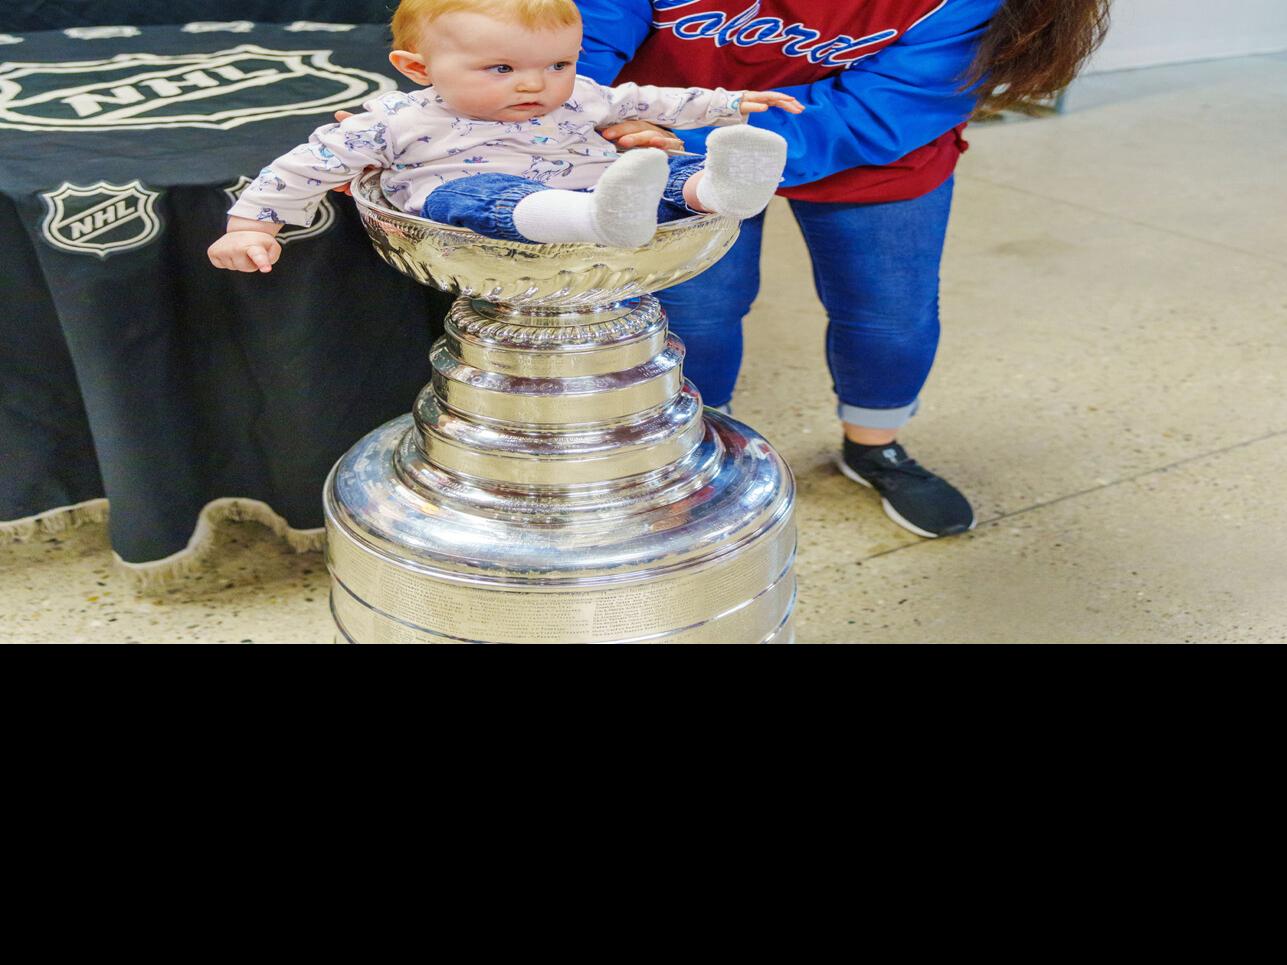 New Record Set For Youngest Baby In Stanley Cup - SB Nation Chicago